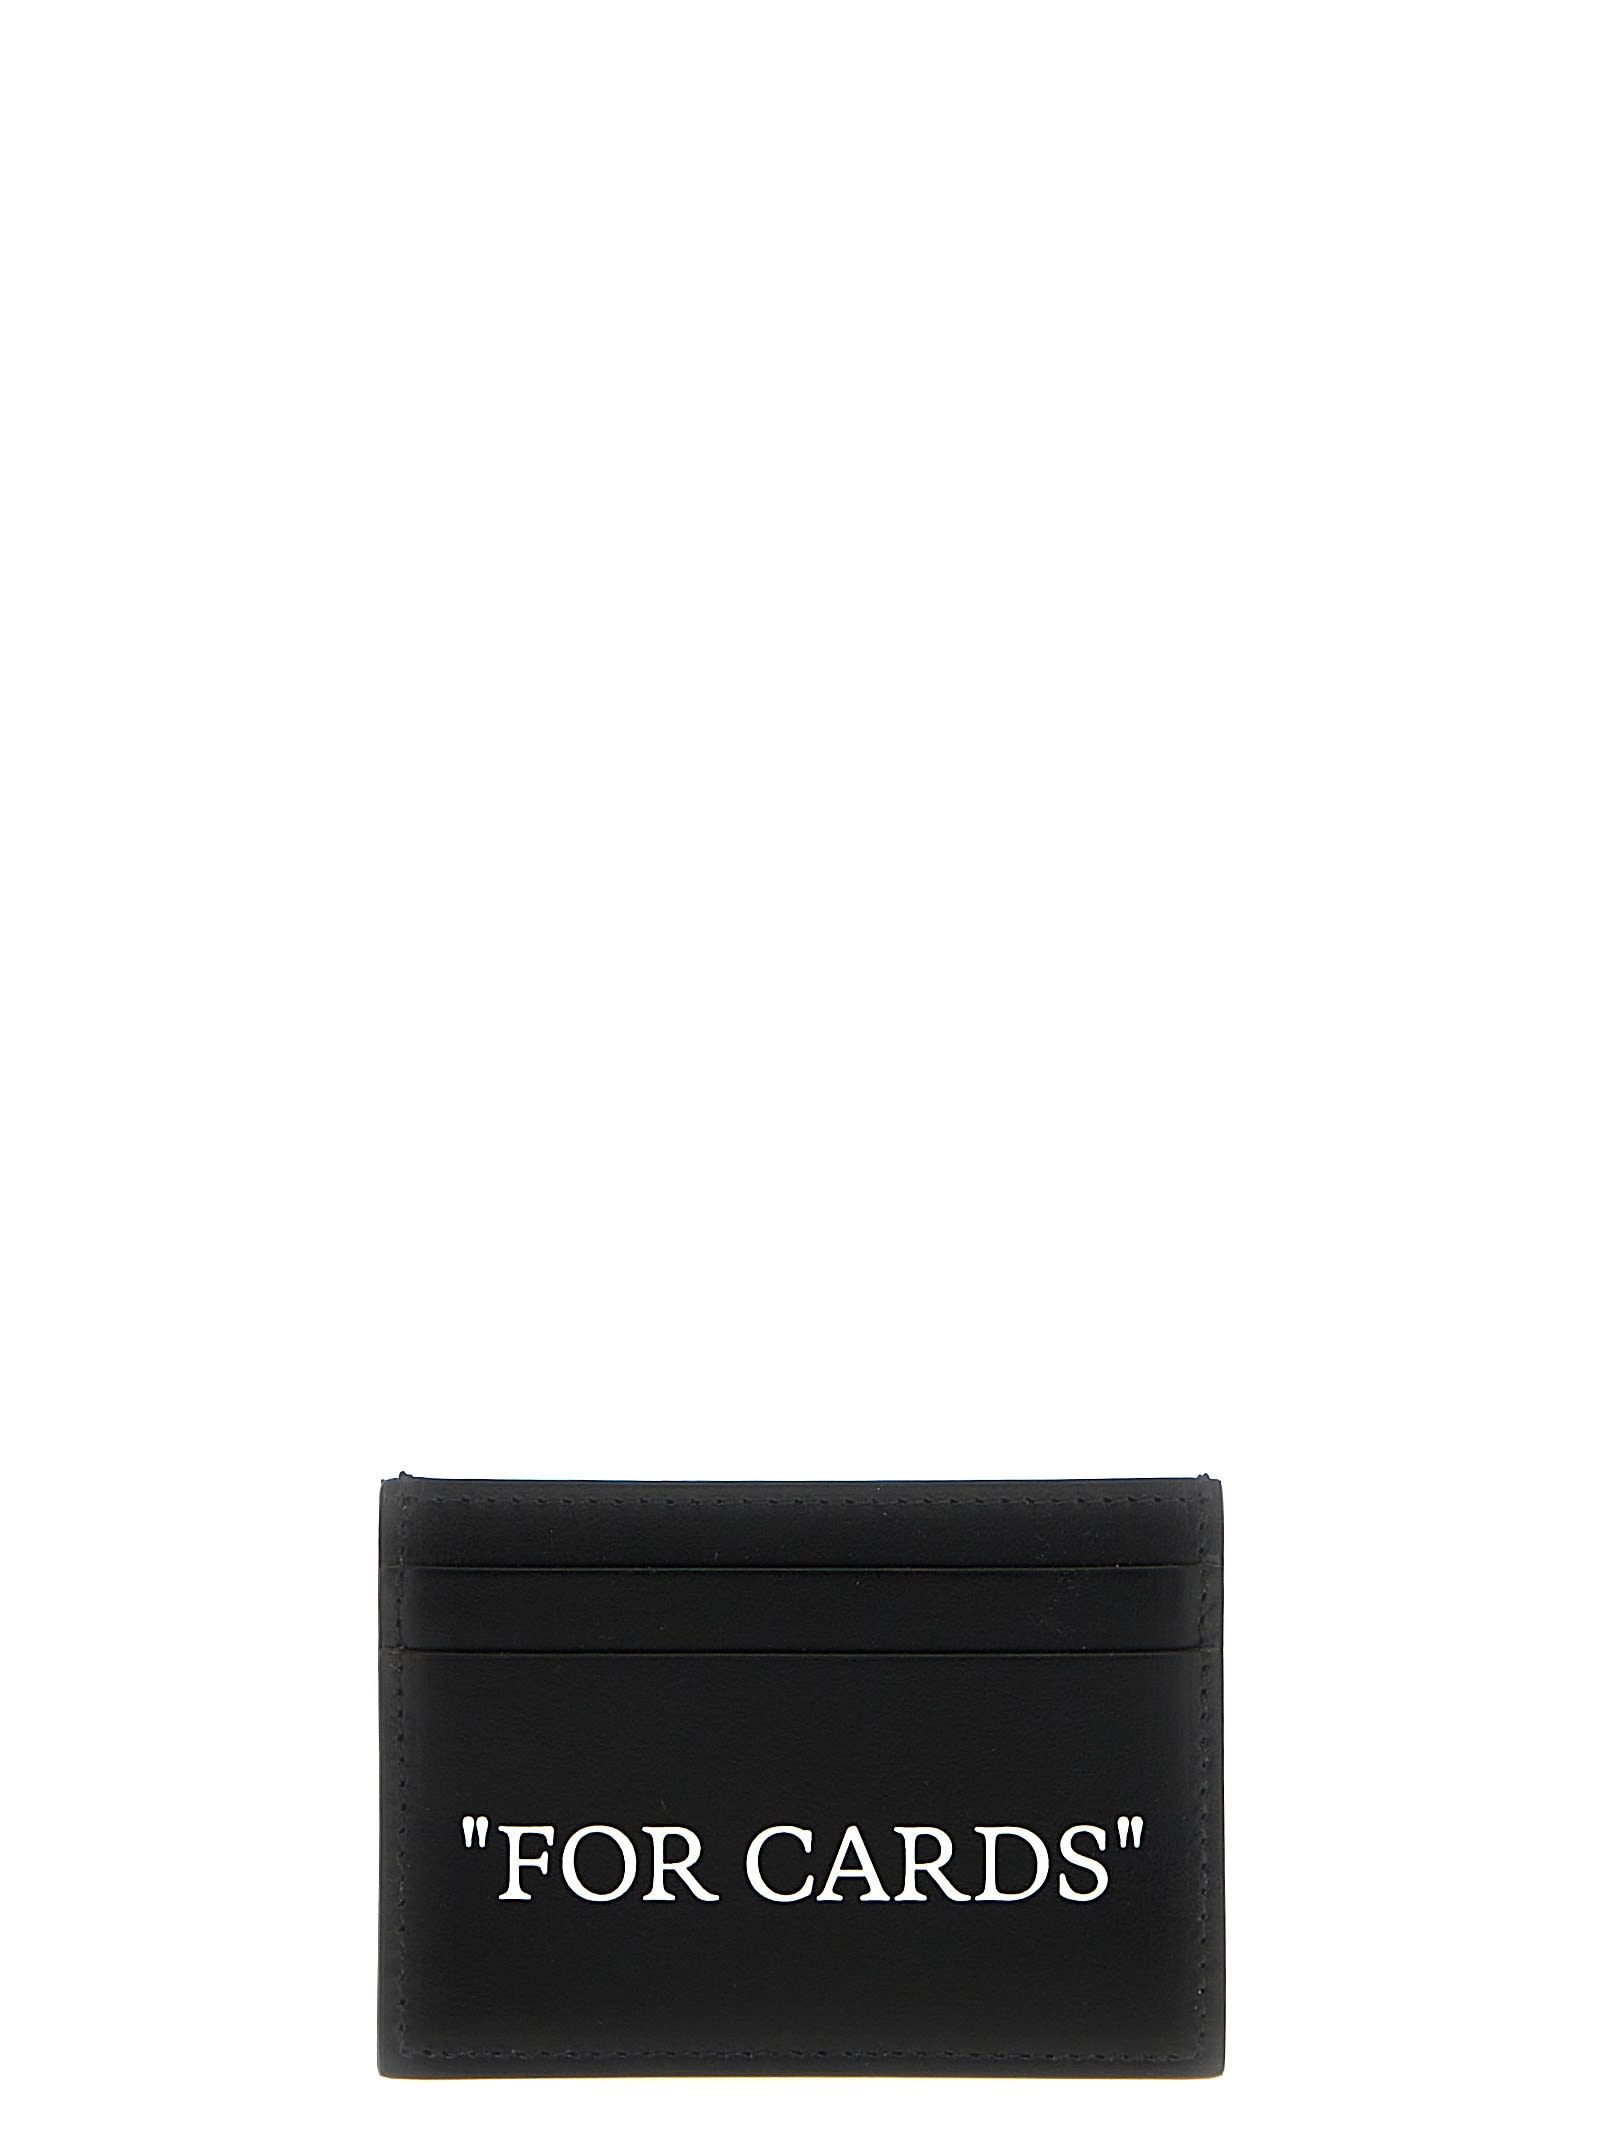 OFF-WHITE QUOTE BOOKISH CARD HOLDER